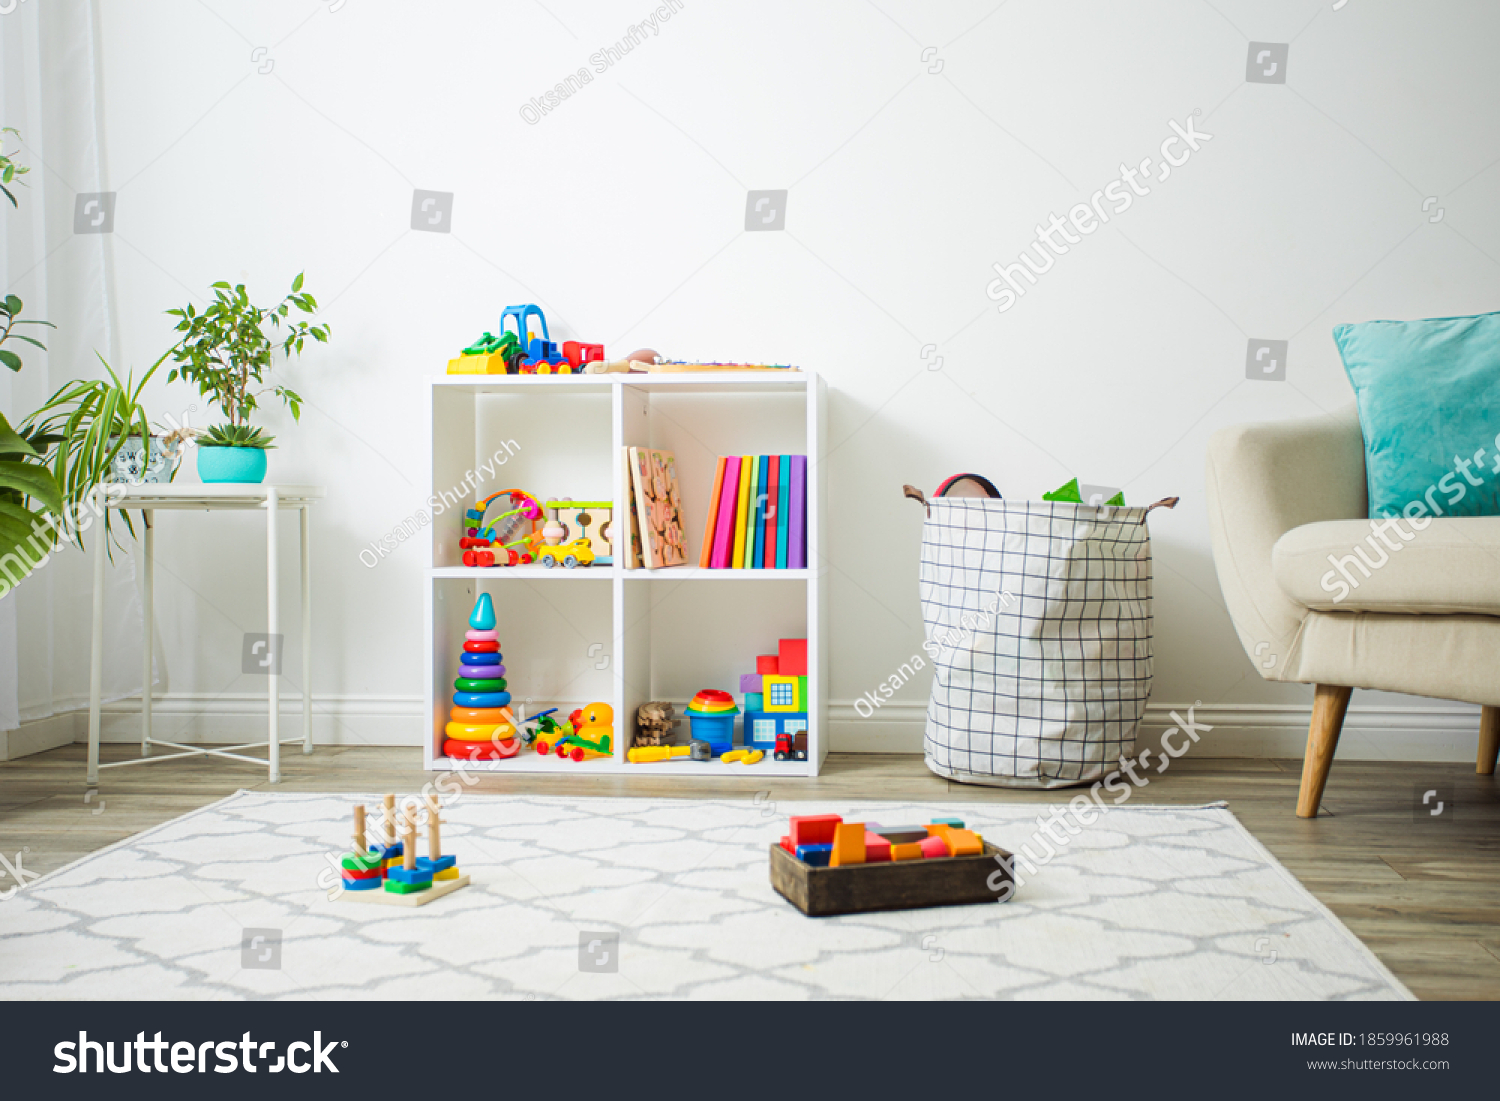 Modern playroom for children with perfect order #1859961988